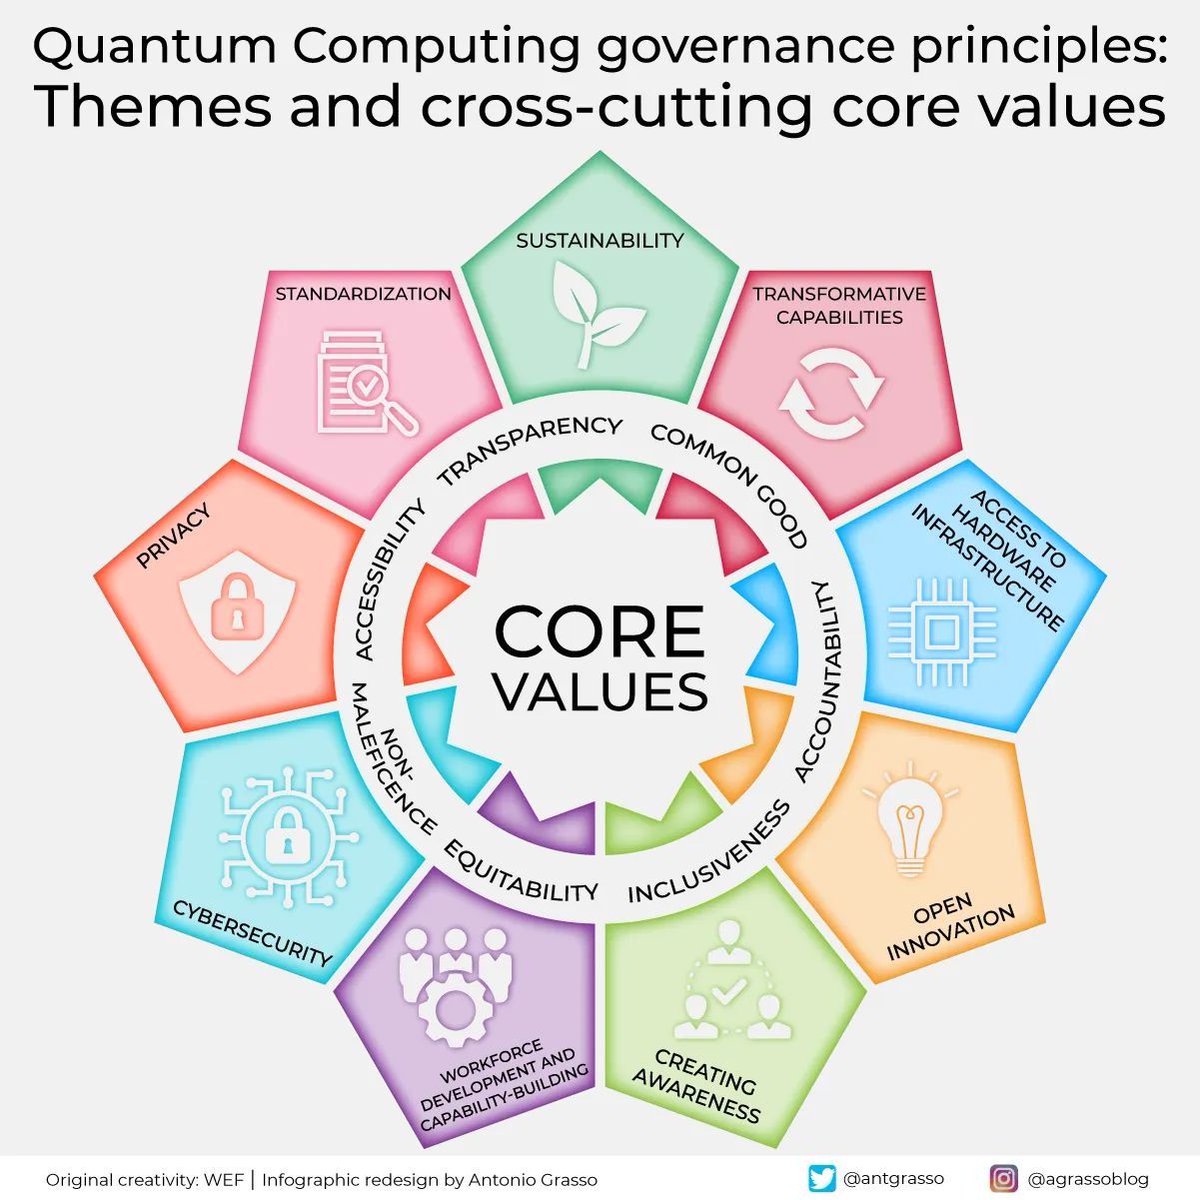 As we work to regulate artificial intelligence, it's critical that we not lose sight of the profound potential of quantum computing. This disruptive technology, if it lives up to its projected potential, is likely to present a complex set of challenges. 

#QuantumComputing #AI